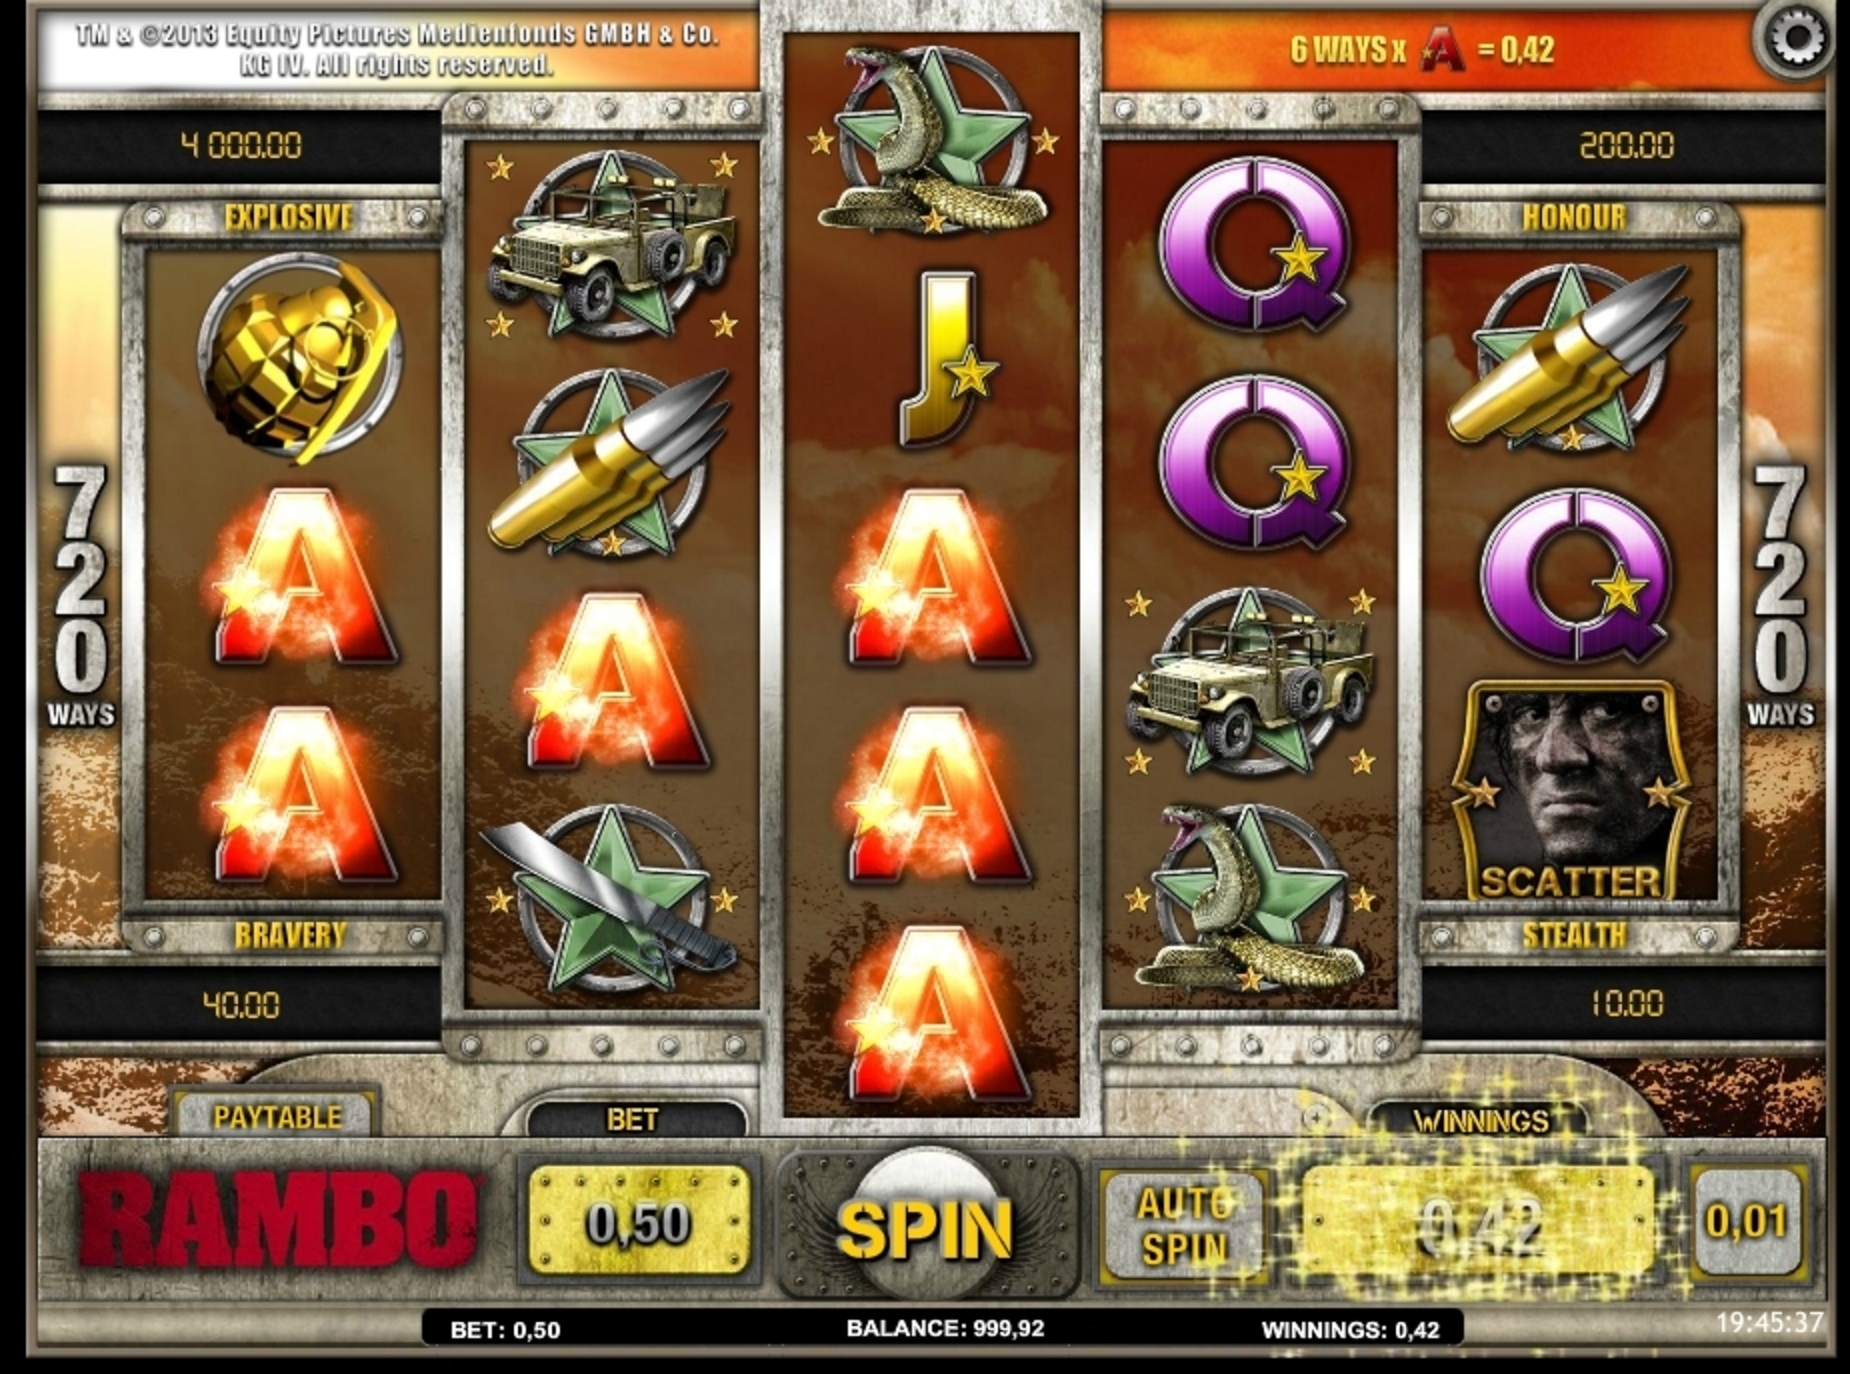 Win Money in Rambo Free Slot Game by iSoftBet